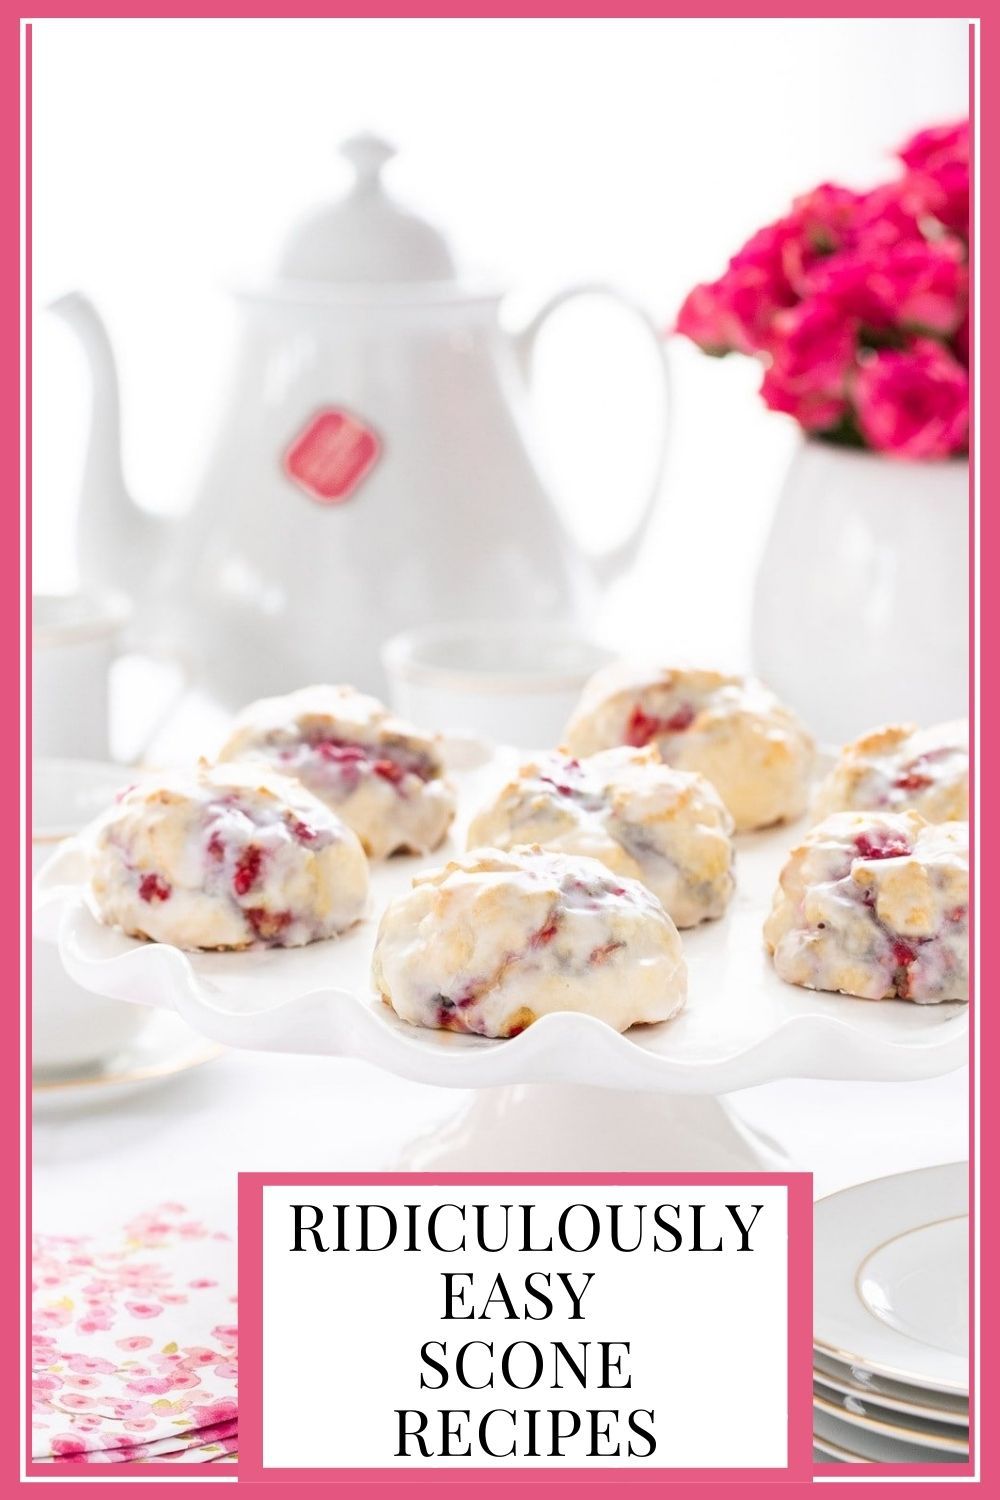 Fabulous Scones - the Ridiculously Easy Way!